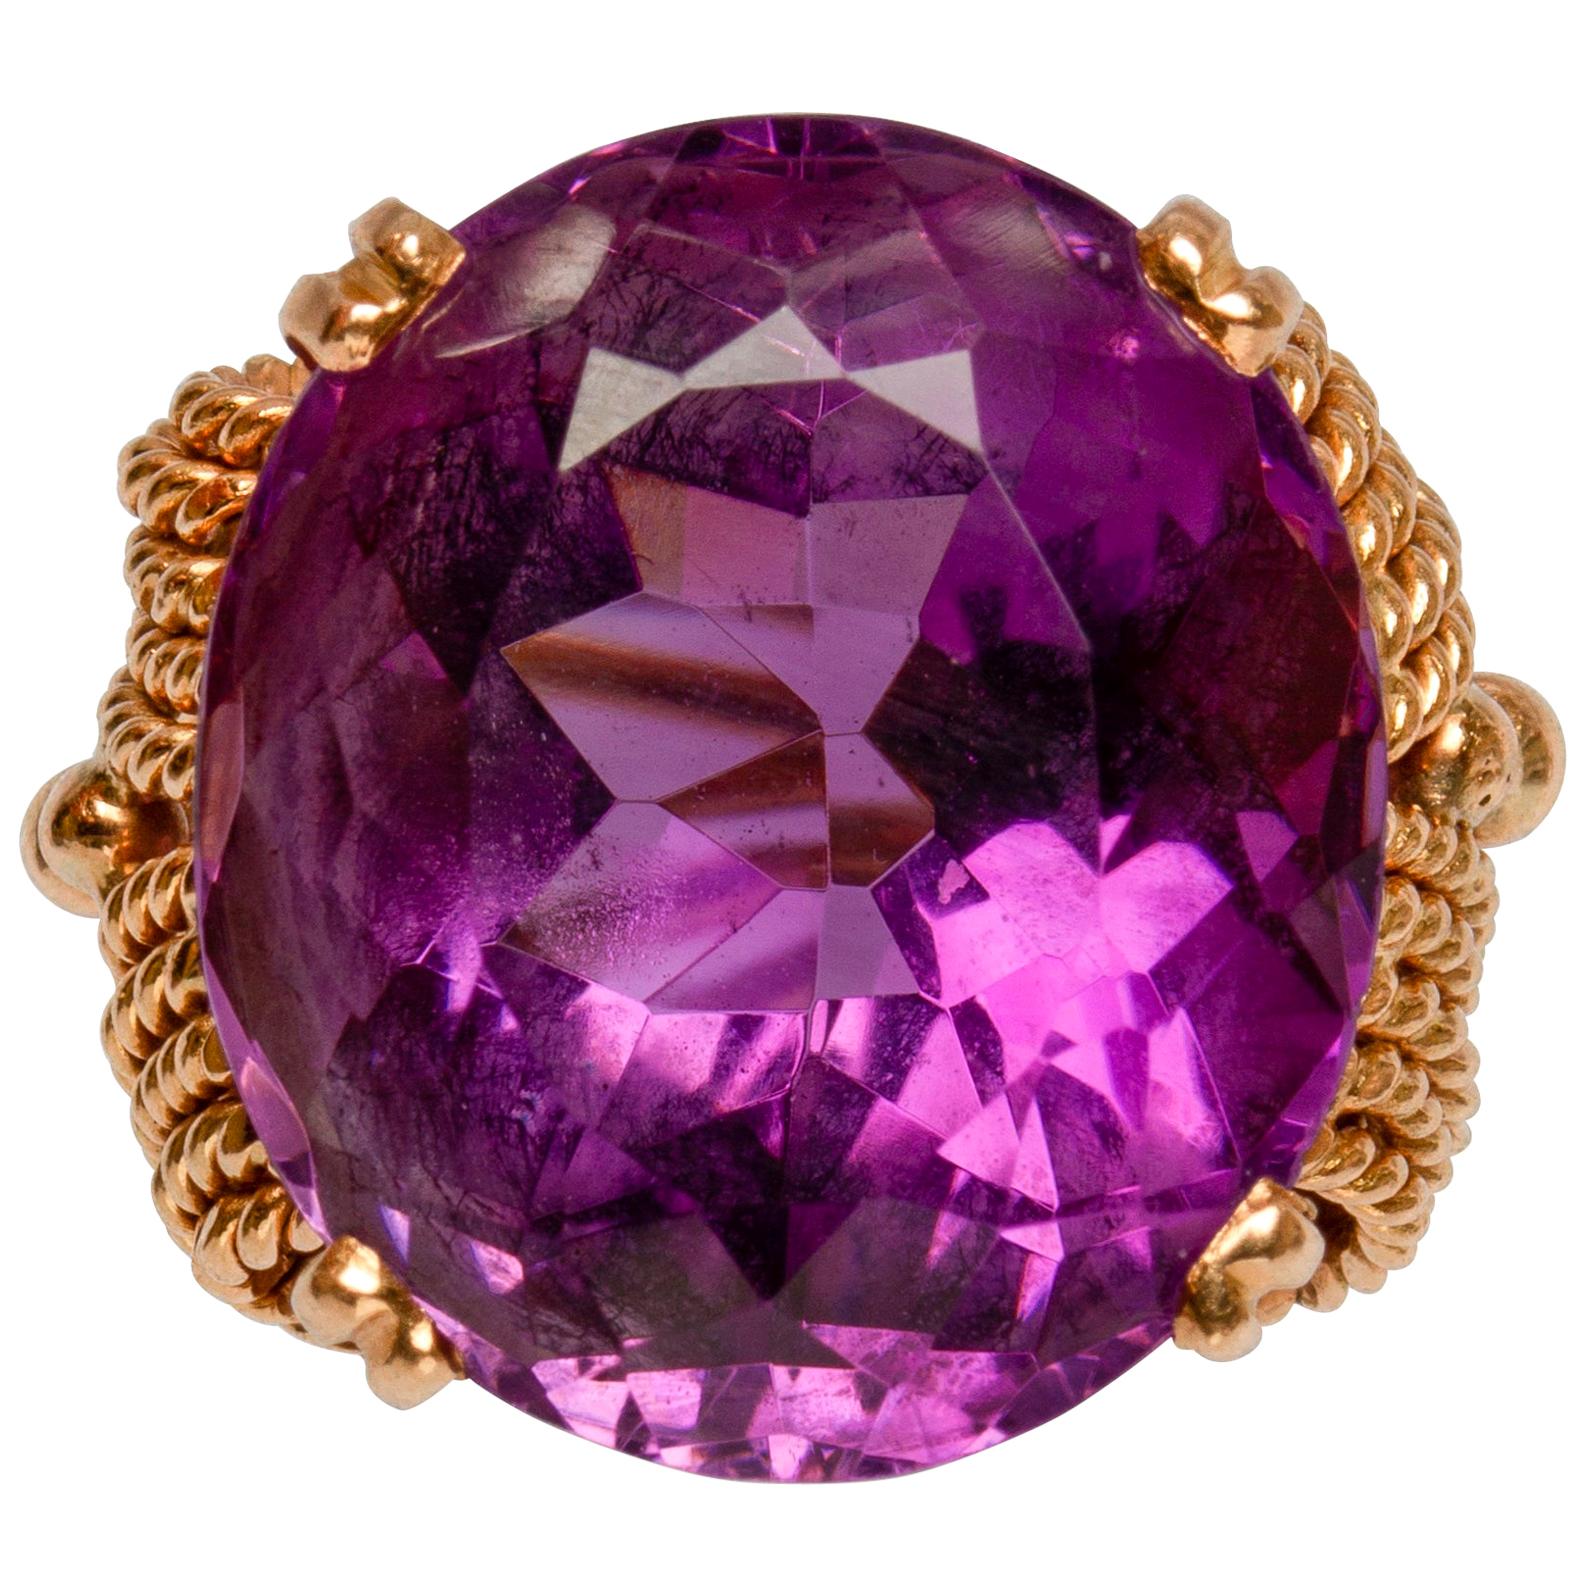 18 Karat Yellow Gold and Amethyst Cocktail Ring